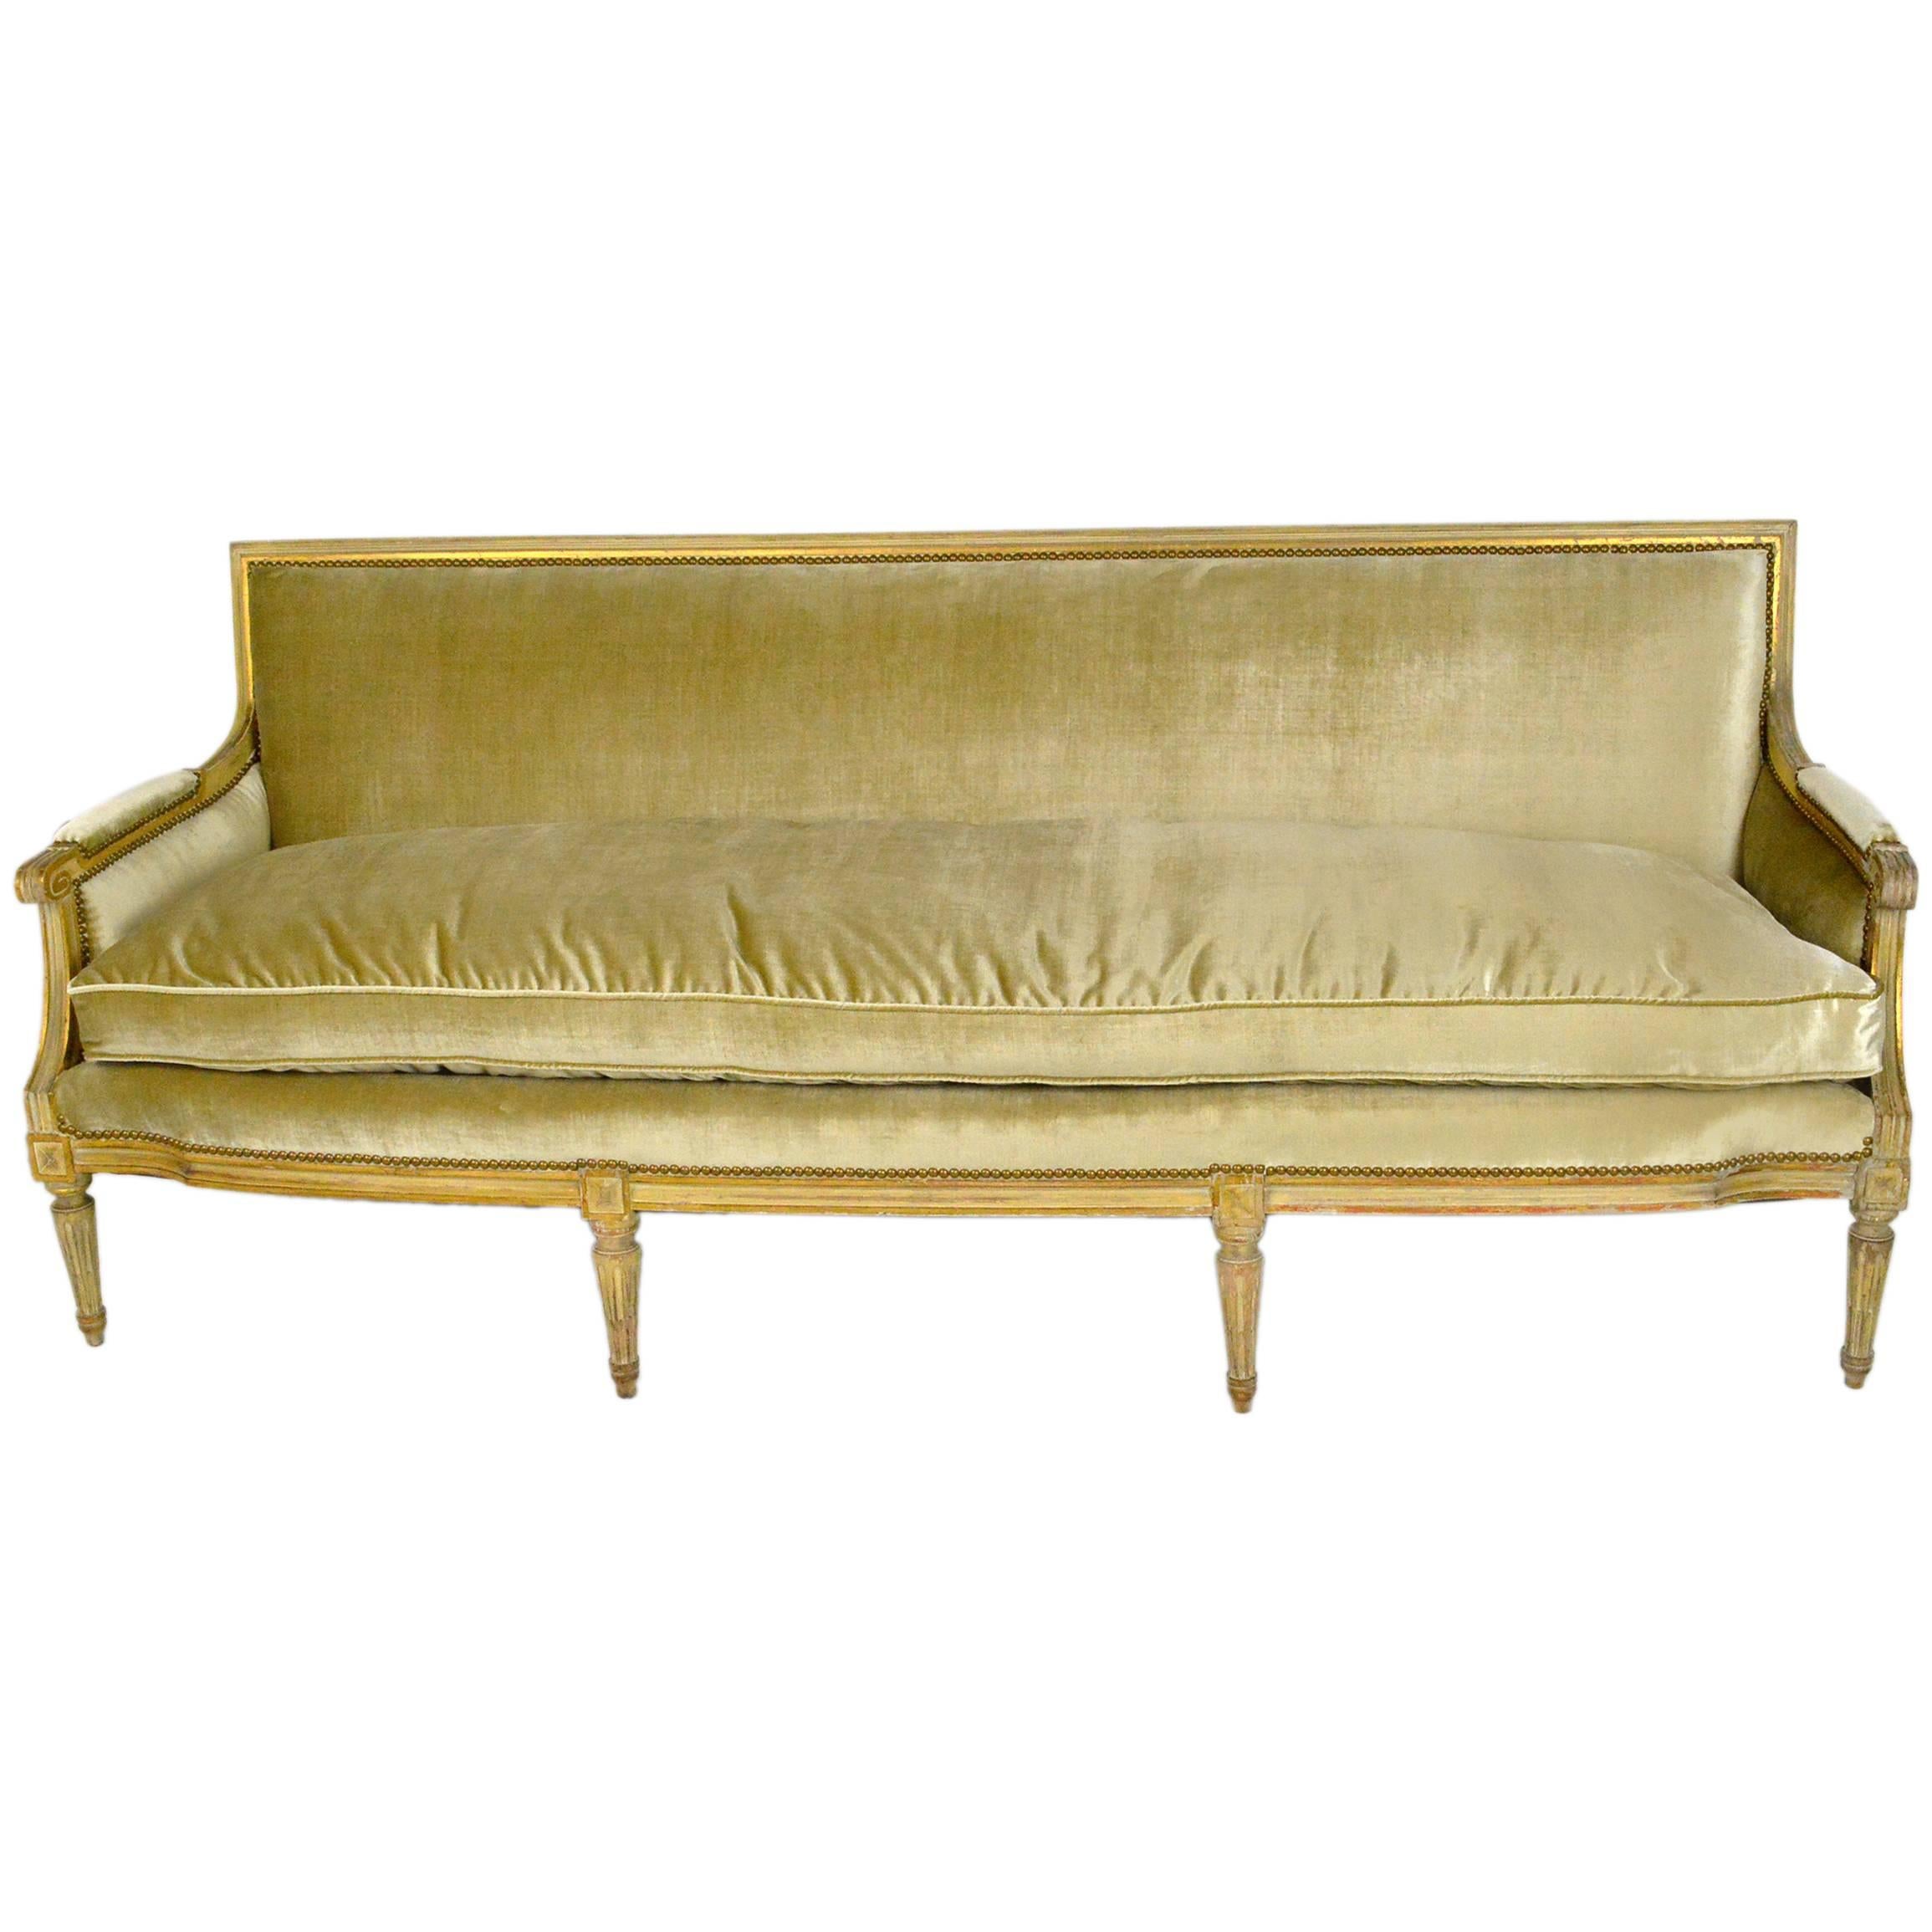 French Louis XVI Style Painted Canape Sofa